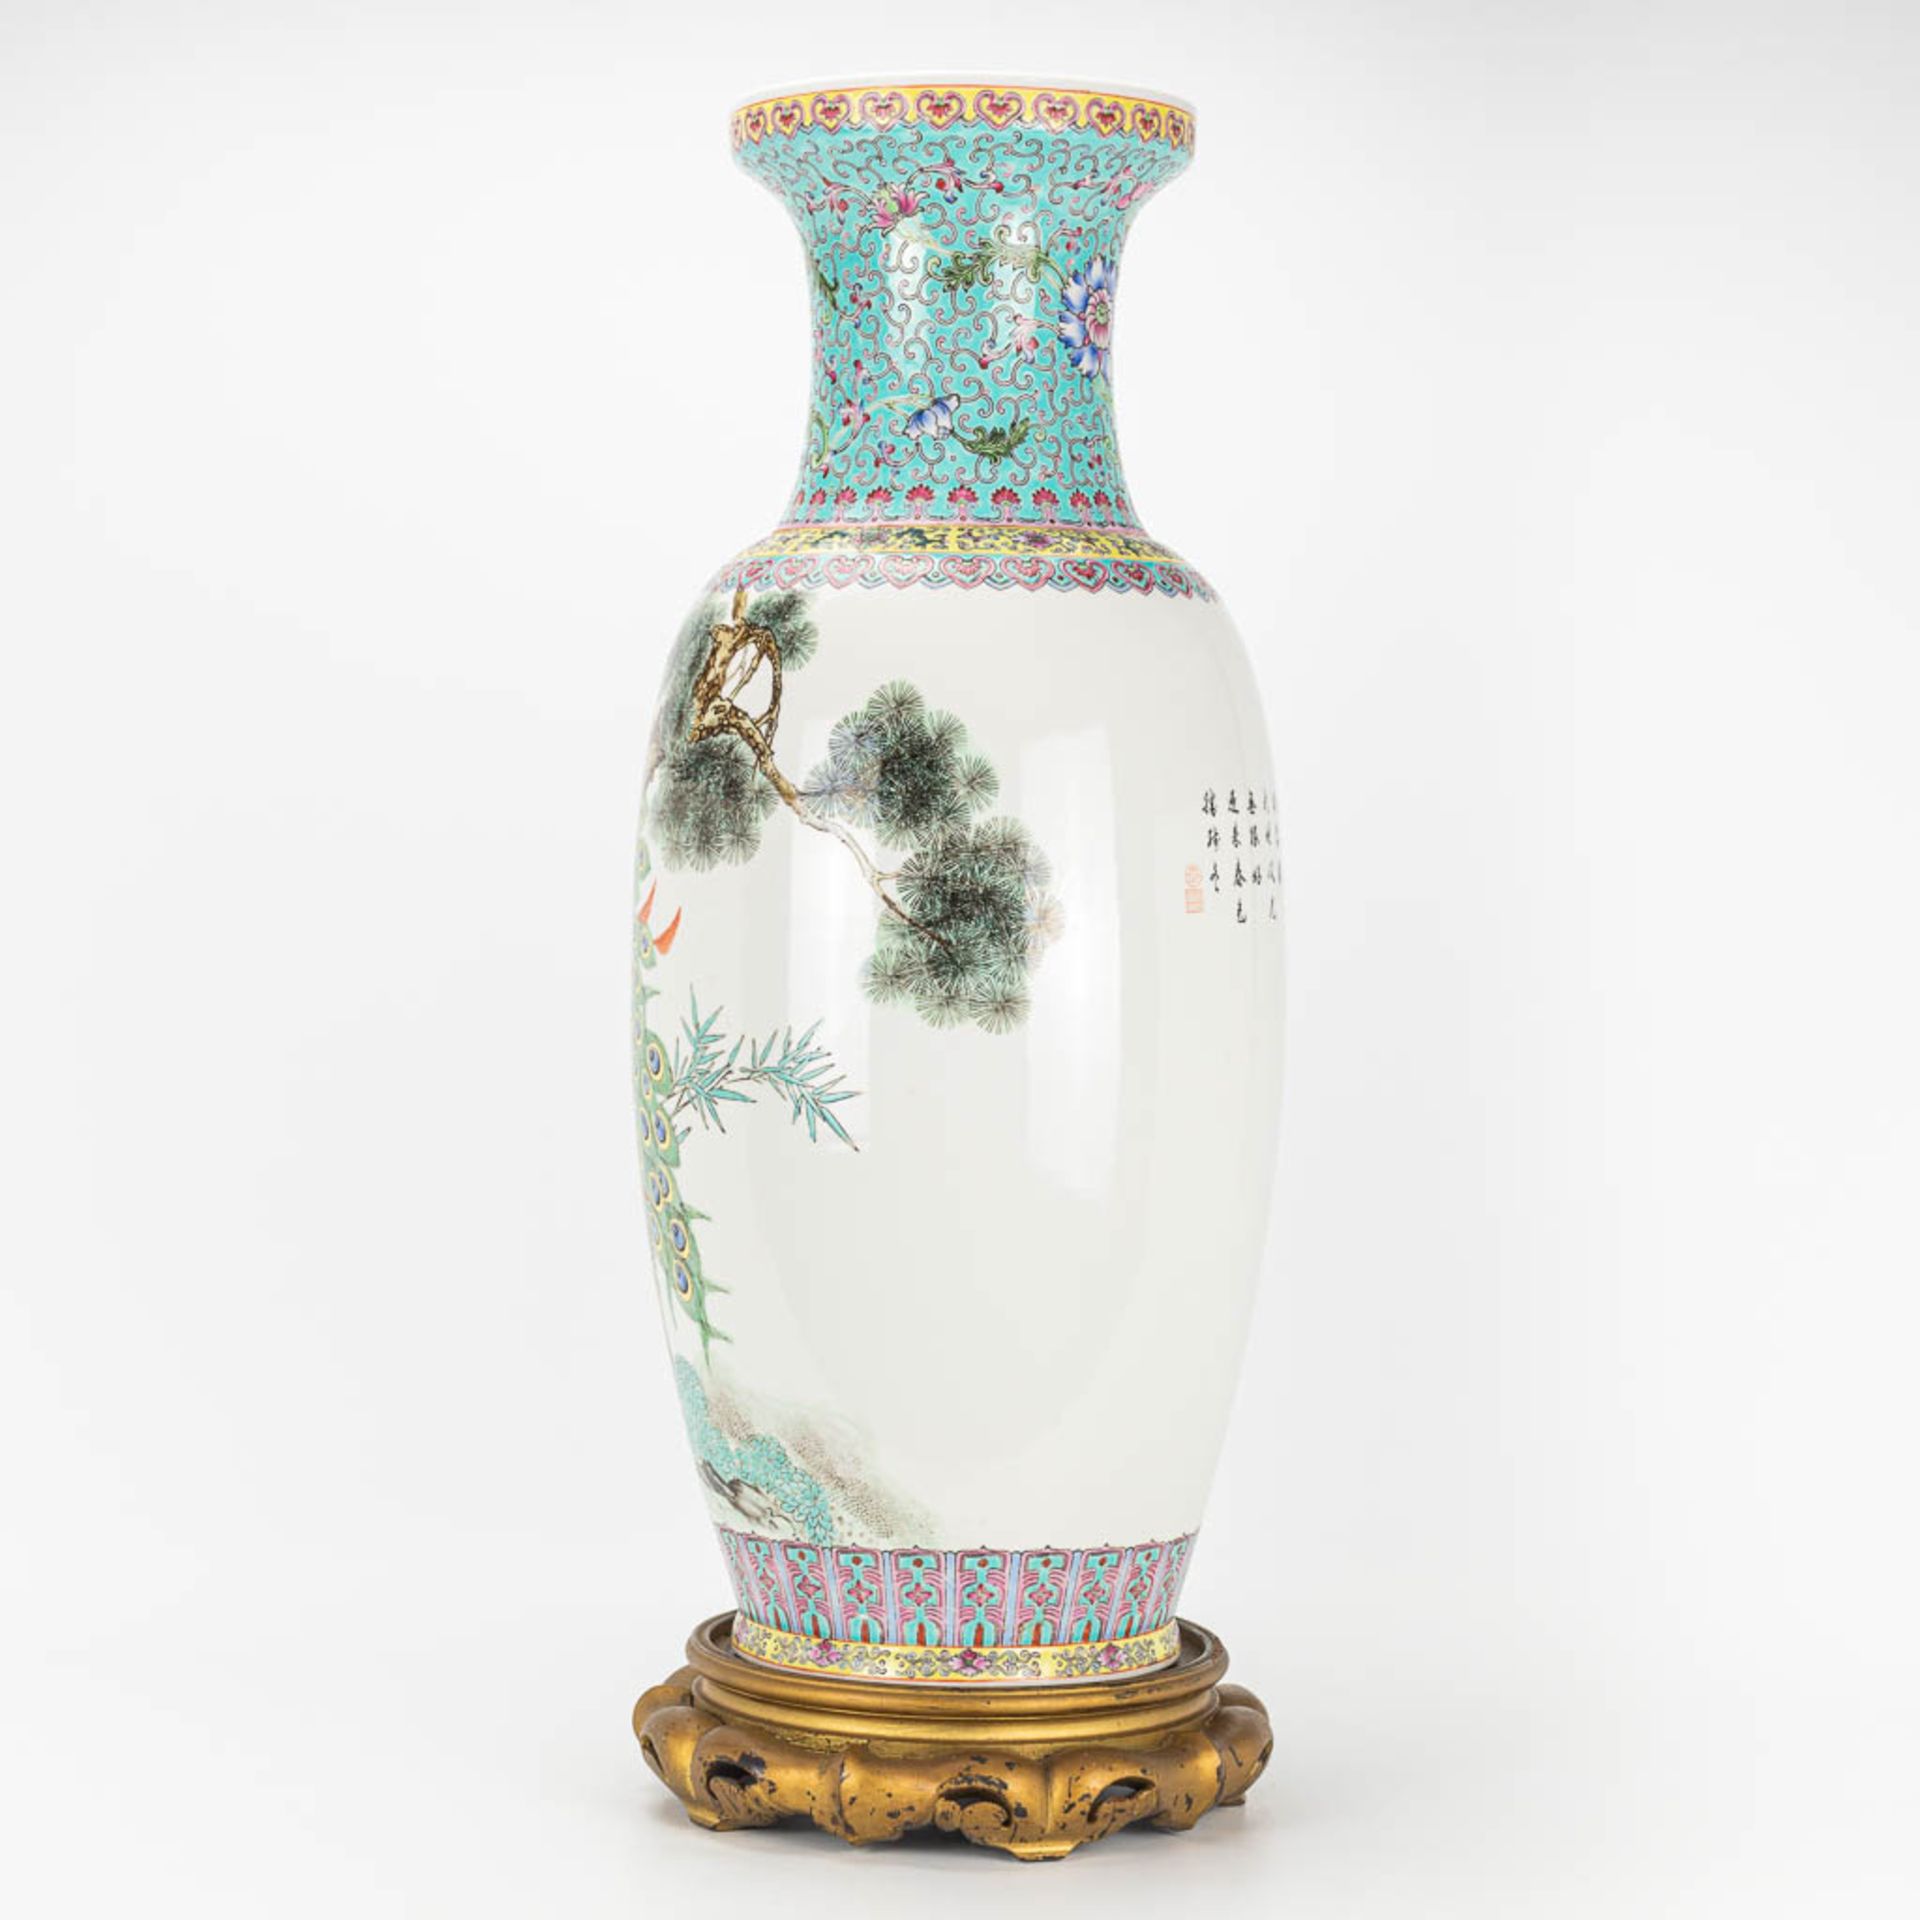 A vase made of Chinese porcelain and decorated with peacocks - Image 11 of 16